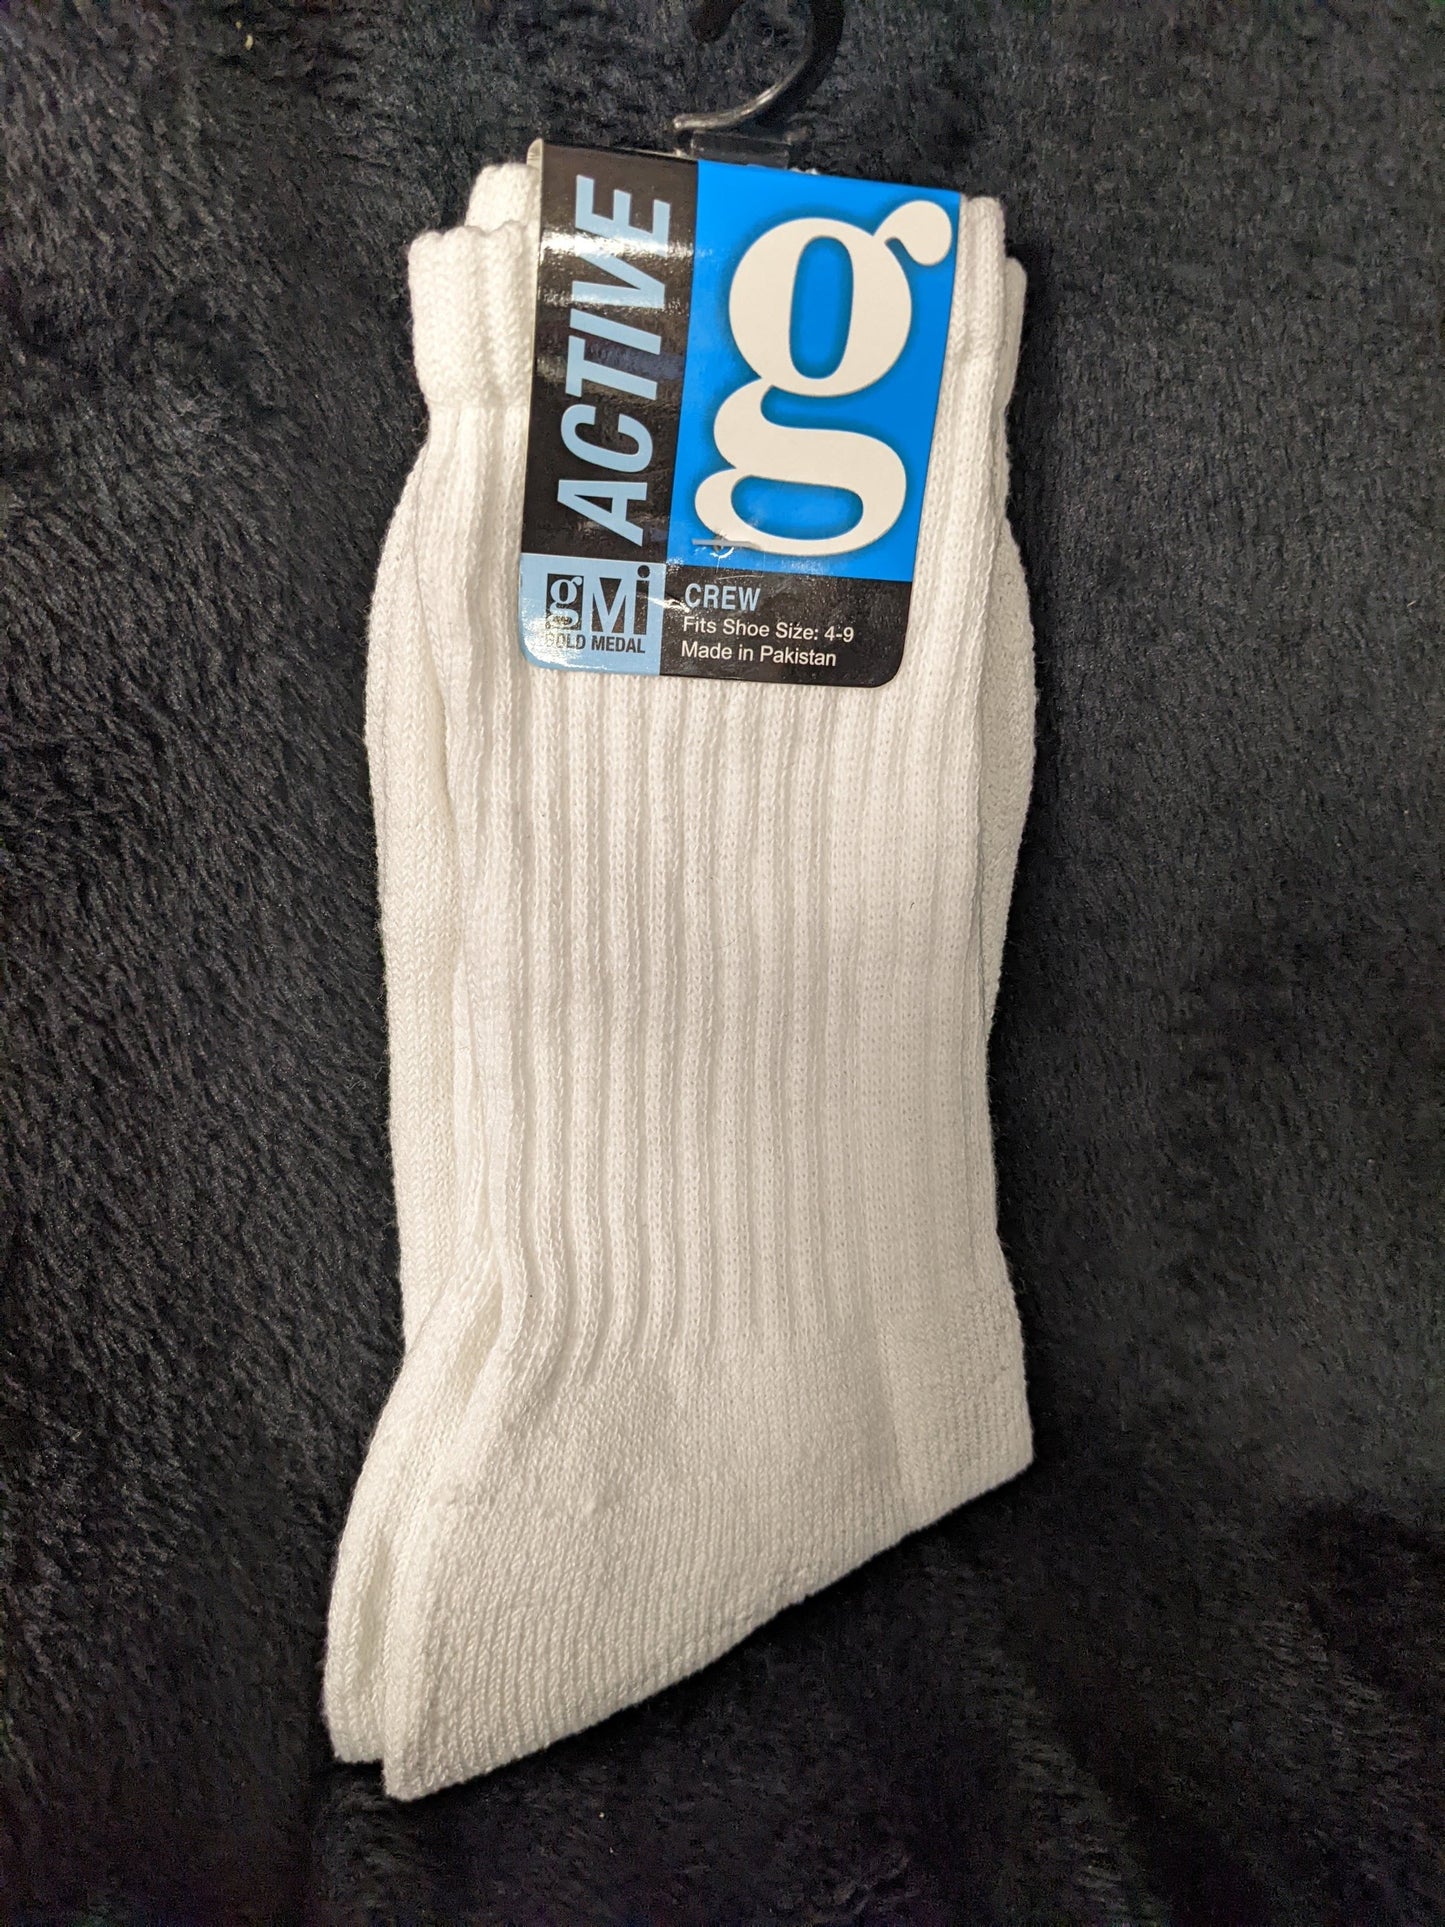 Gold Medal Active G Crew Socks Size 4-9 Color White Condition New